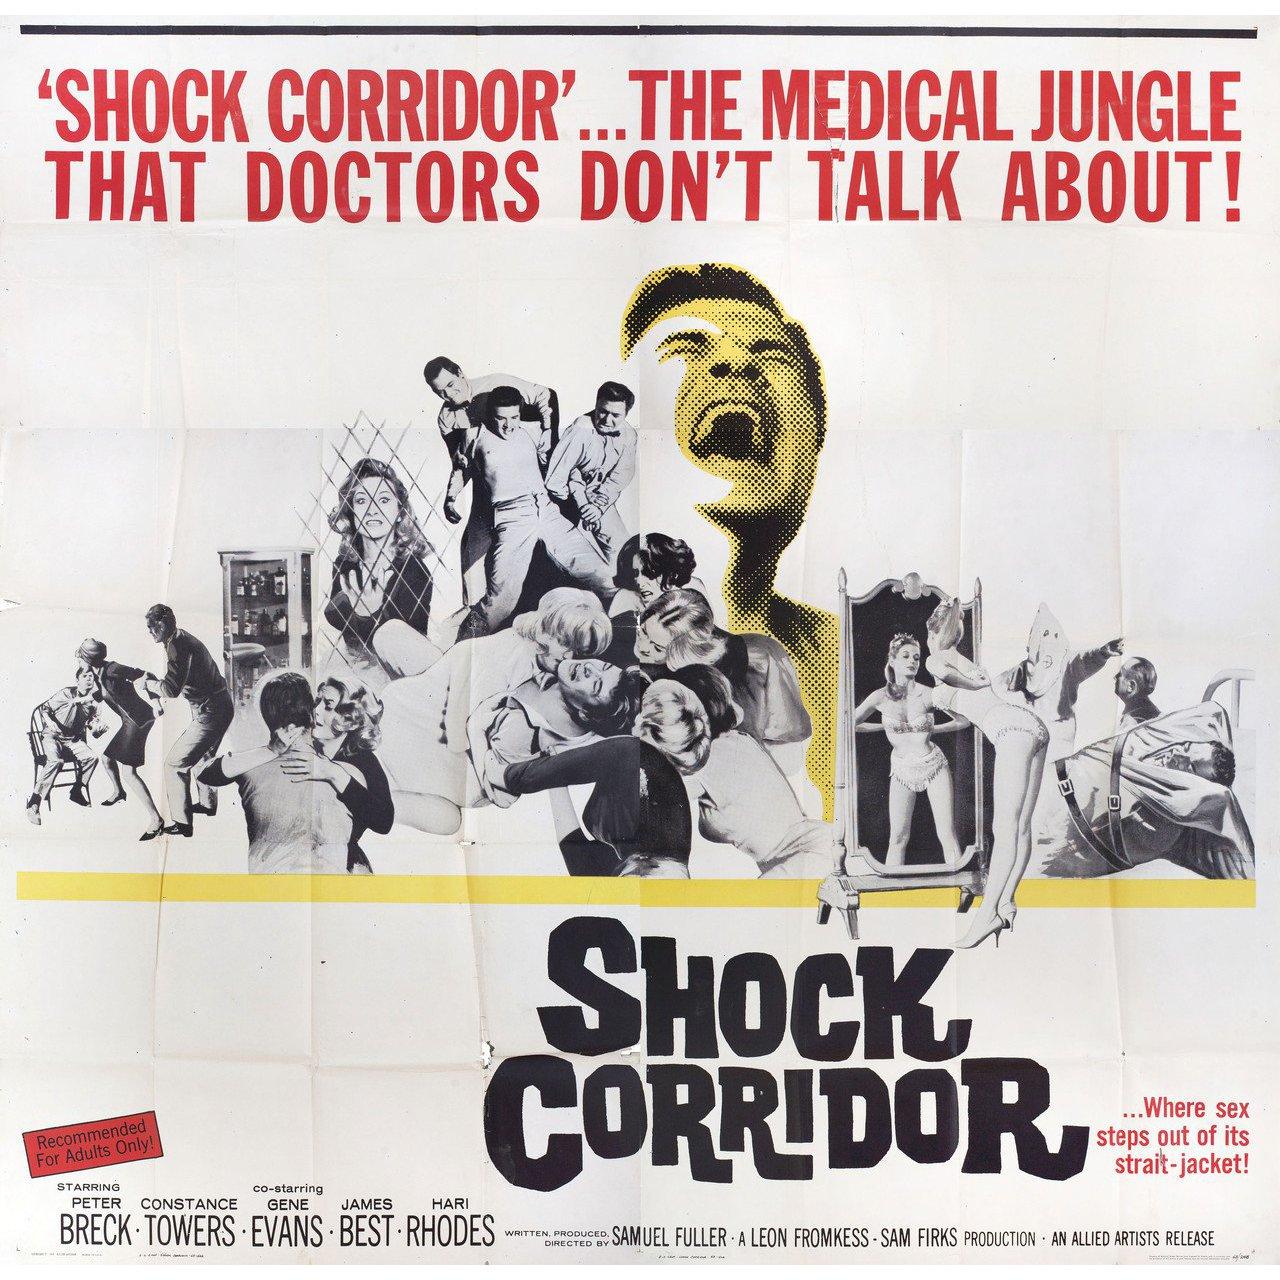 Original 1963 U.S. six sheet poster for the film Shock Corridor directed by Samuel Fuller with Peter Breck / Constance Towers / Gene Evans / James Best. Good-very good condition, folded. Many original posters were issued folded or were subsequently